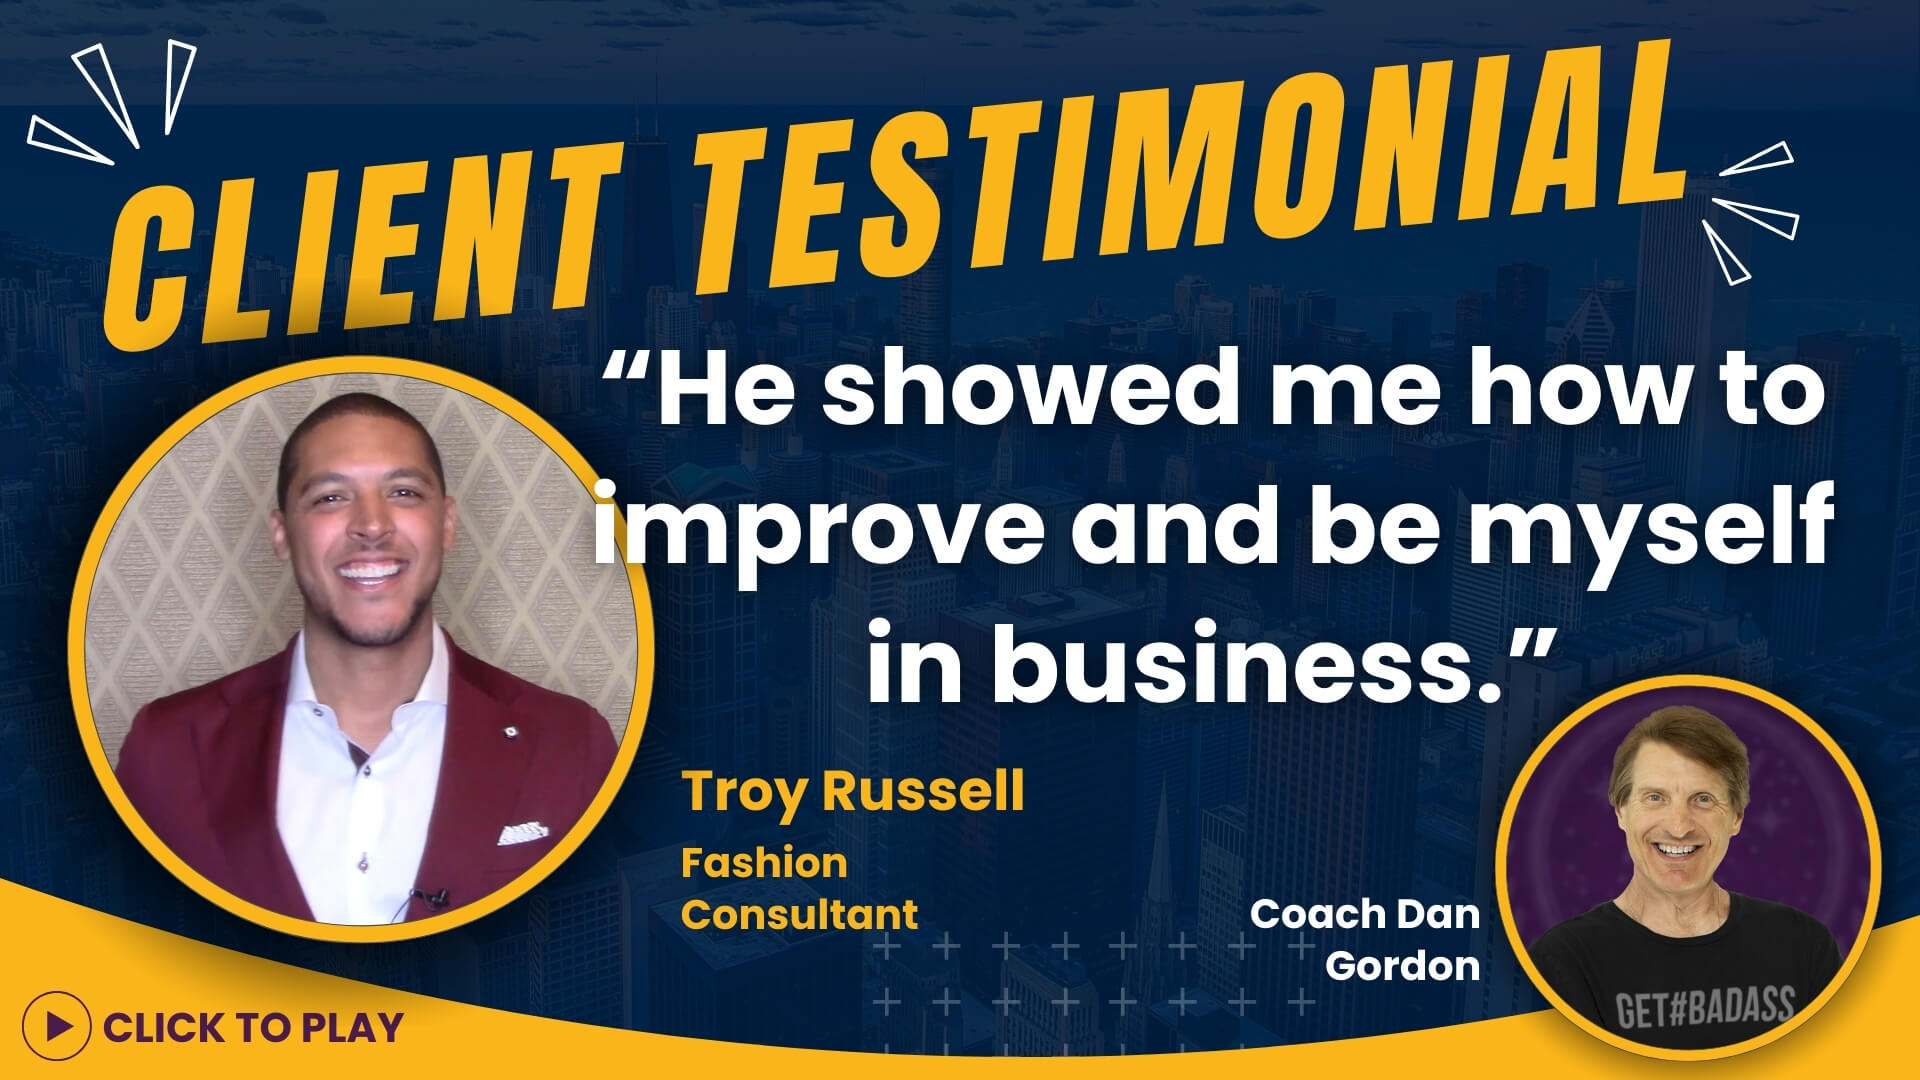 Fashion Consultant Troy Russell testifies to Coach Dan Gordon's influence on personal development in business.